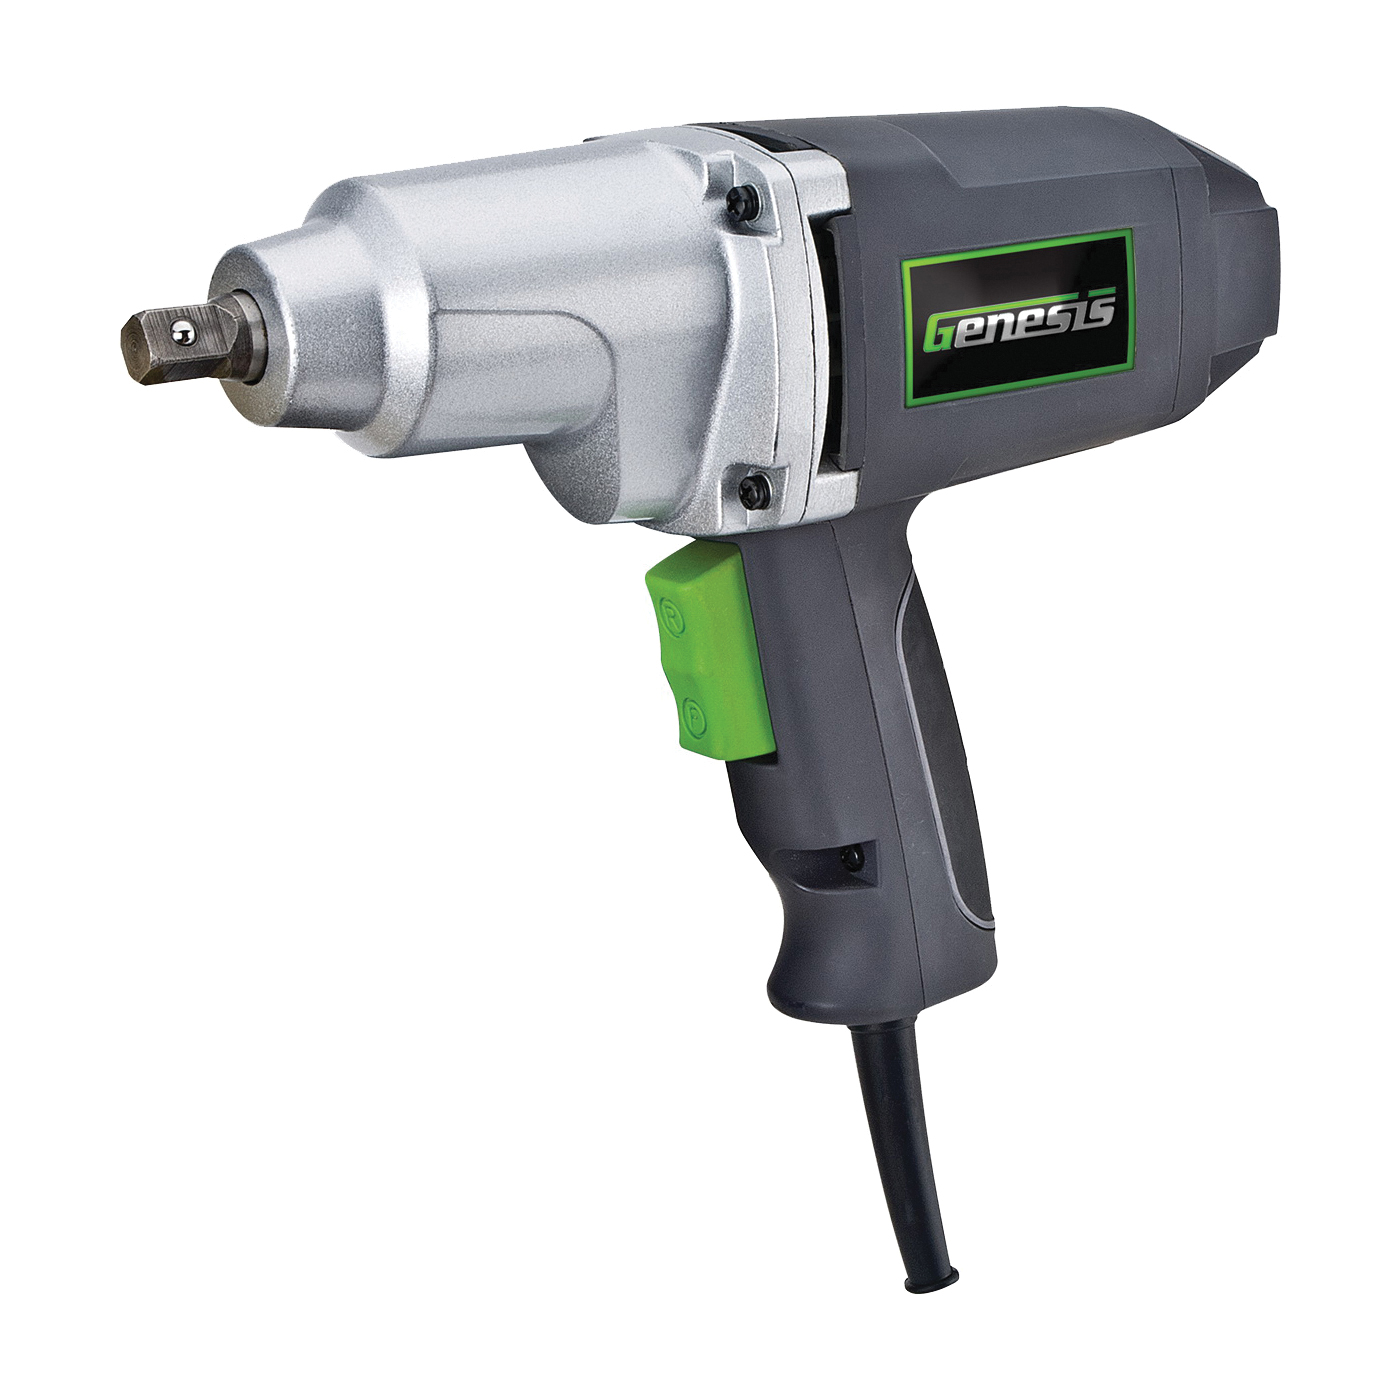 GIW3075K Impact Wrench Kit, 7.5 A, 1/2 in Drive, Square Drive, 0 to 2700 ipm, 0 to 2100 rpm Speed